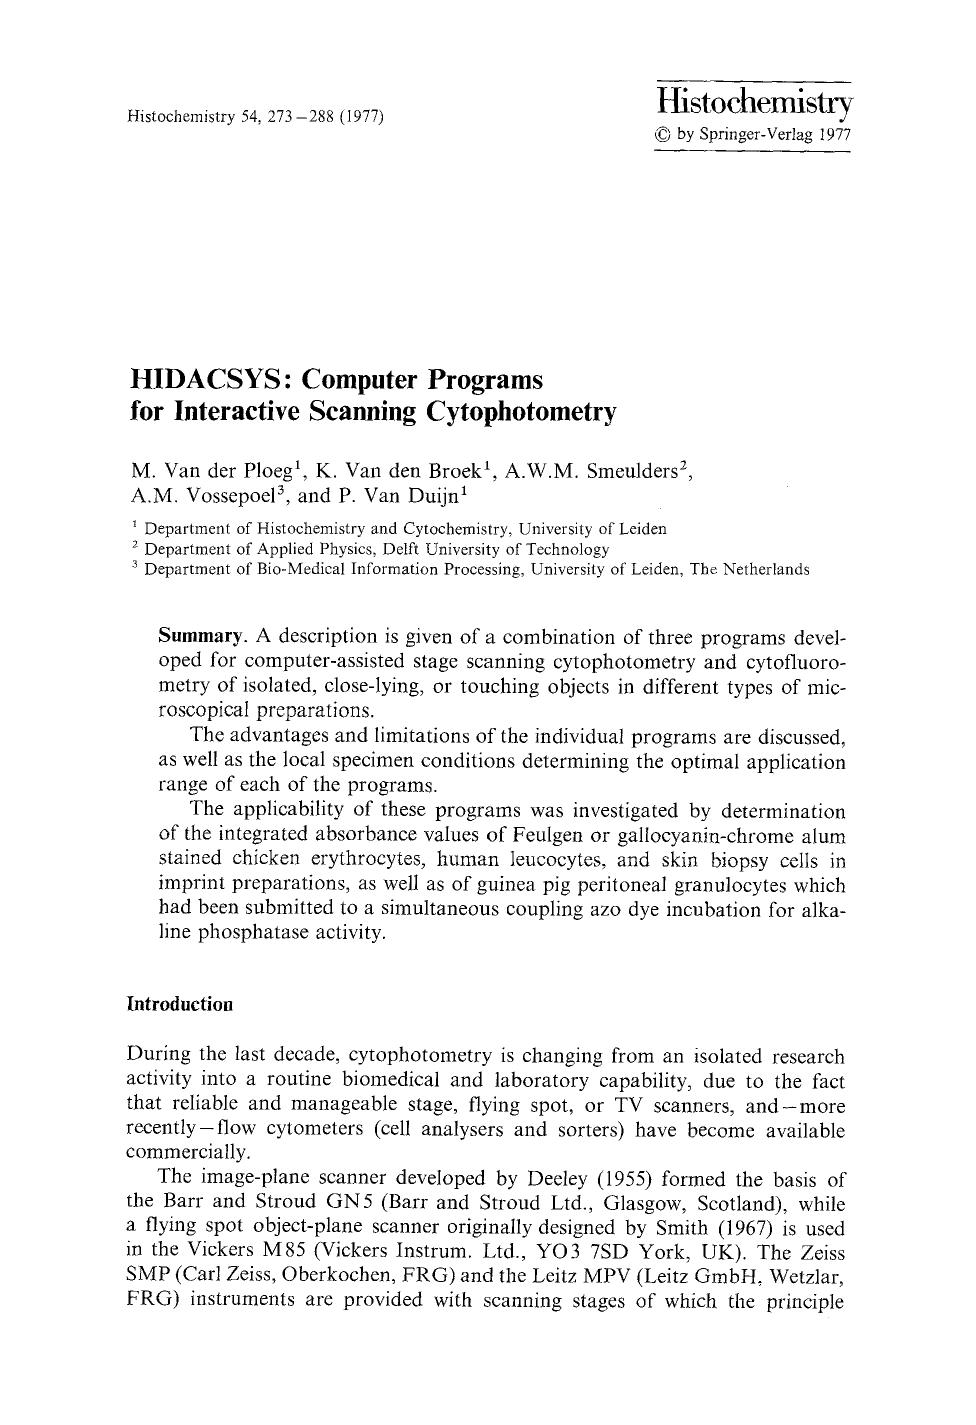 HIDACSYS: Computer programs for interactive scanning cytophotometry by Unknown